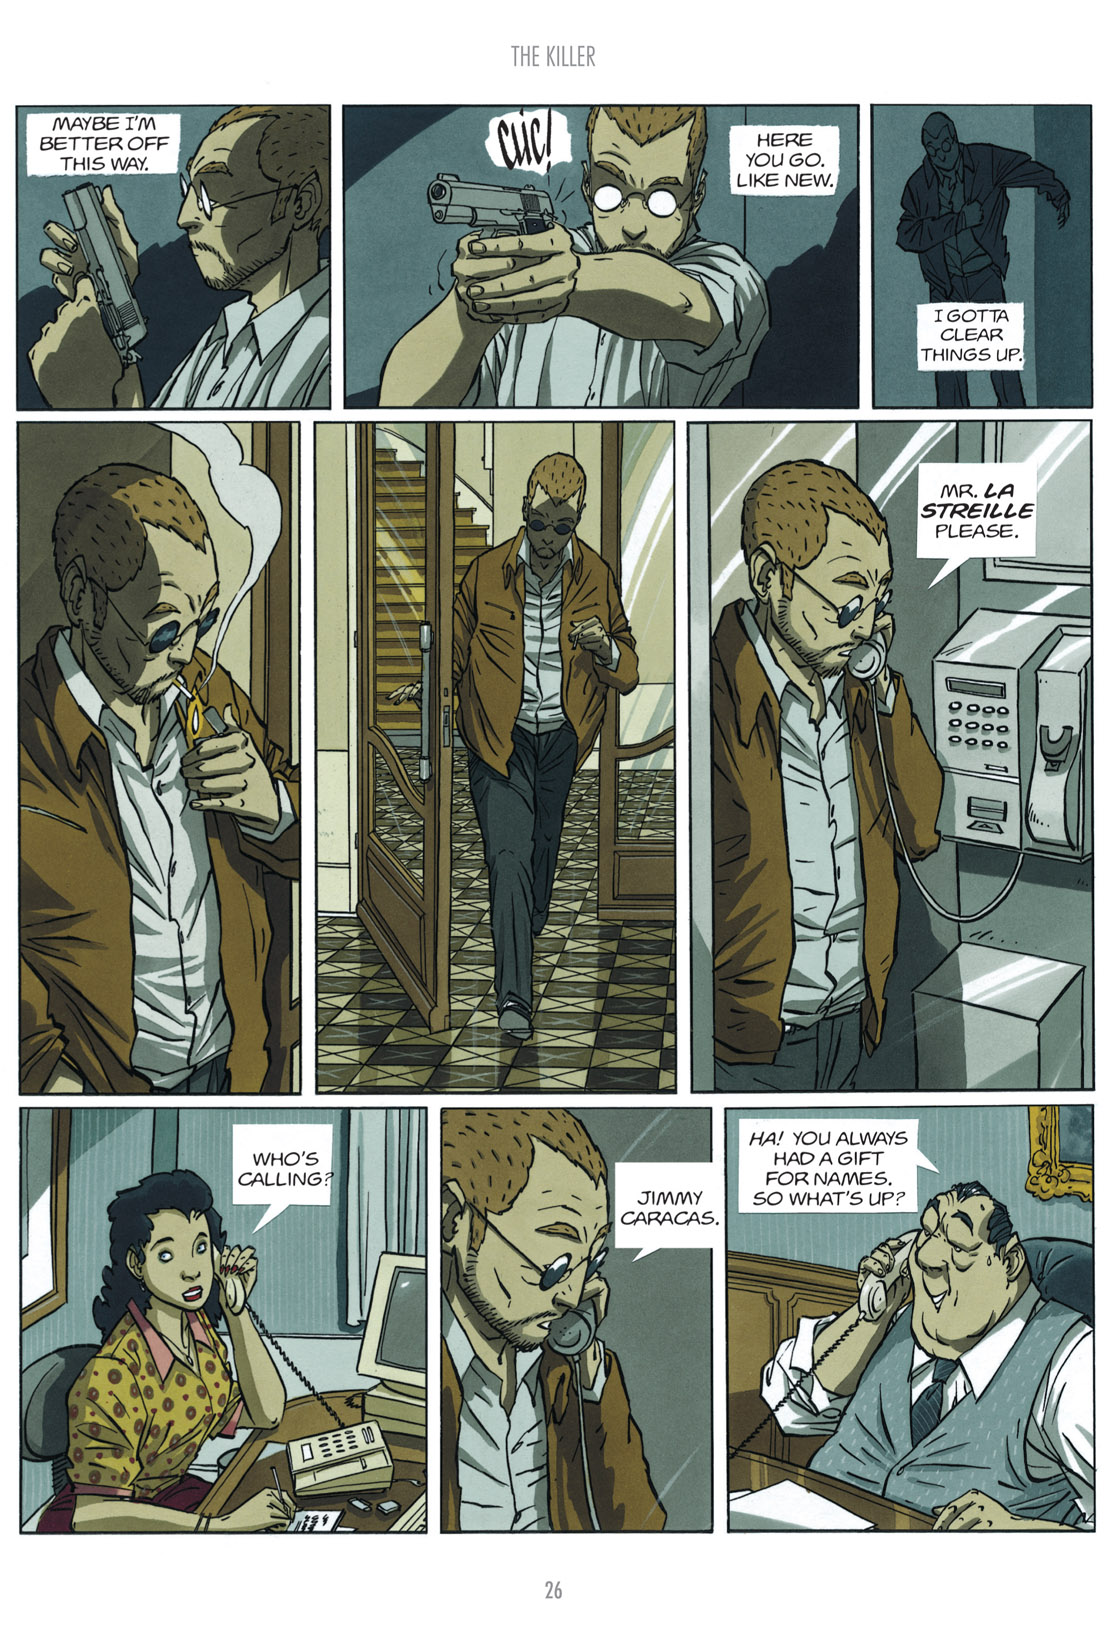 Read online The Killer comic -  Issue # TPB 1 - 65